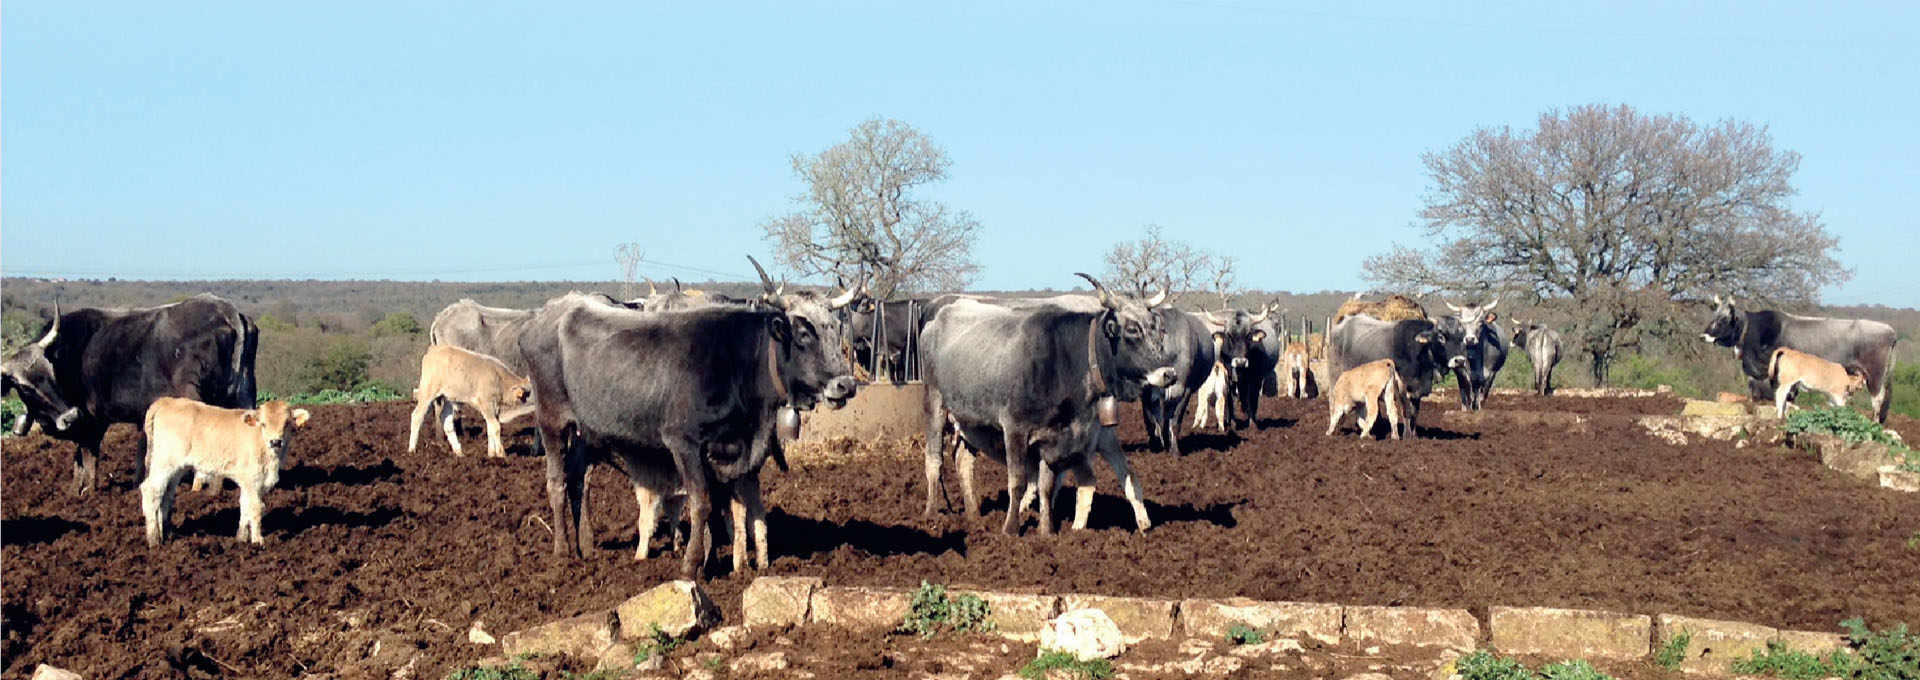 The Quality Milk and Meat of the Podolica Cattle Breed